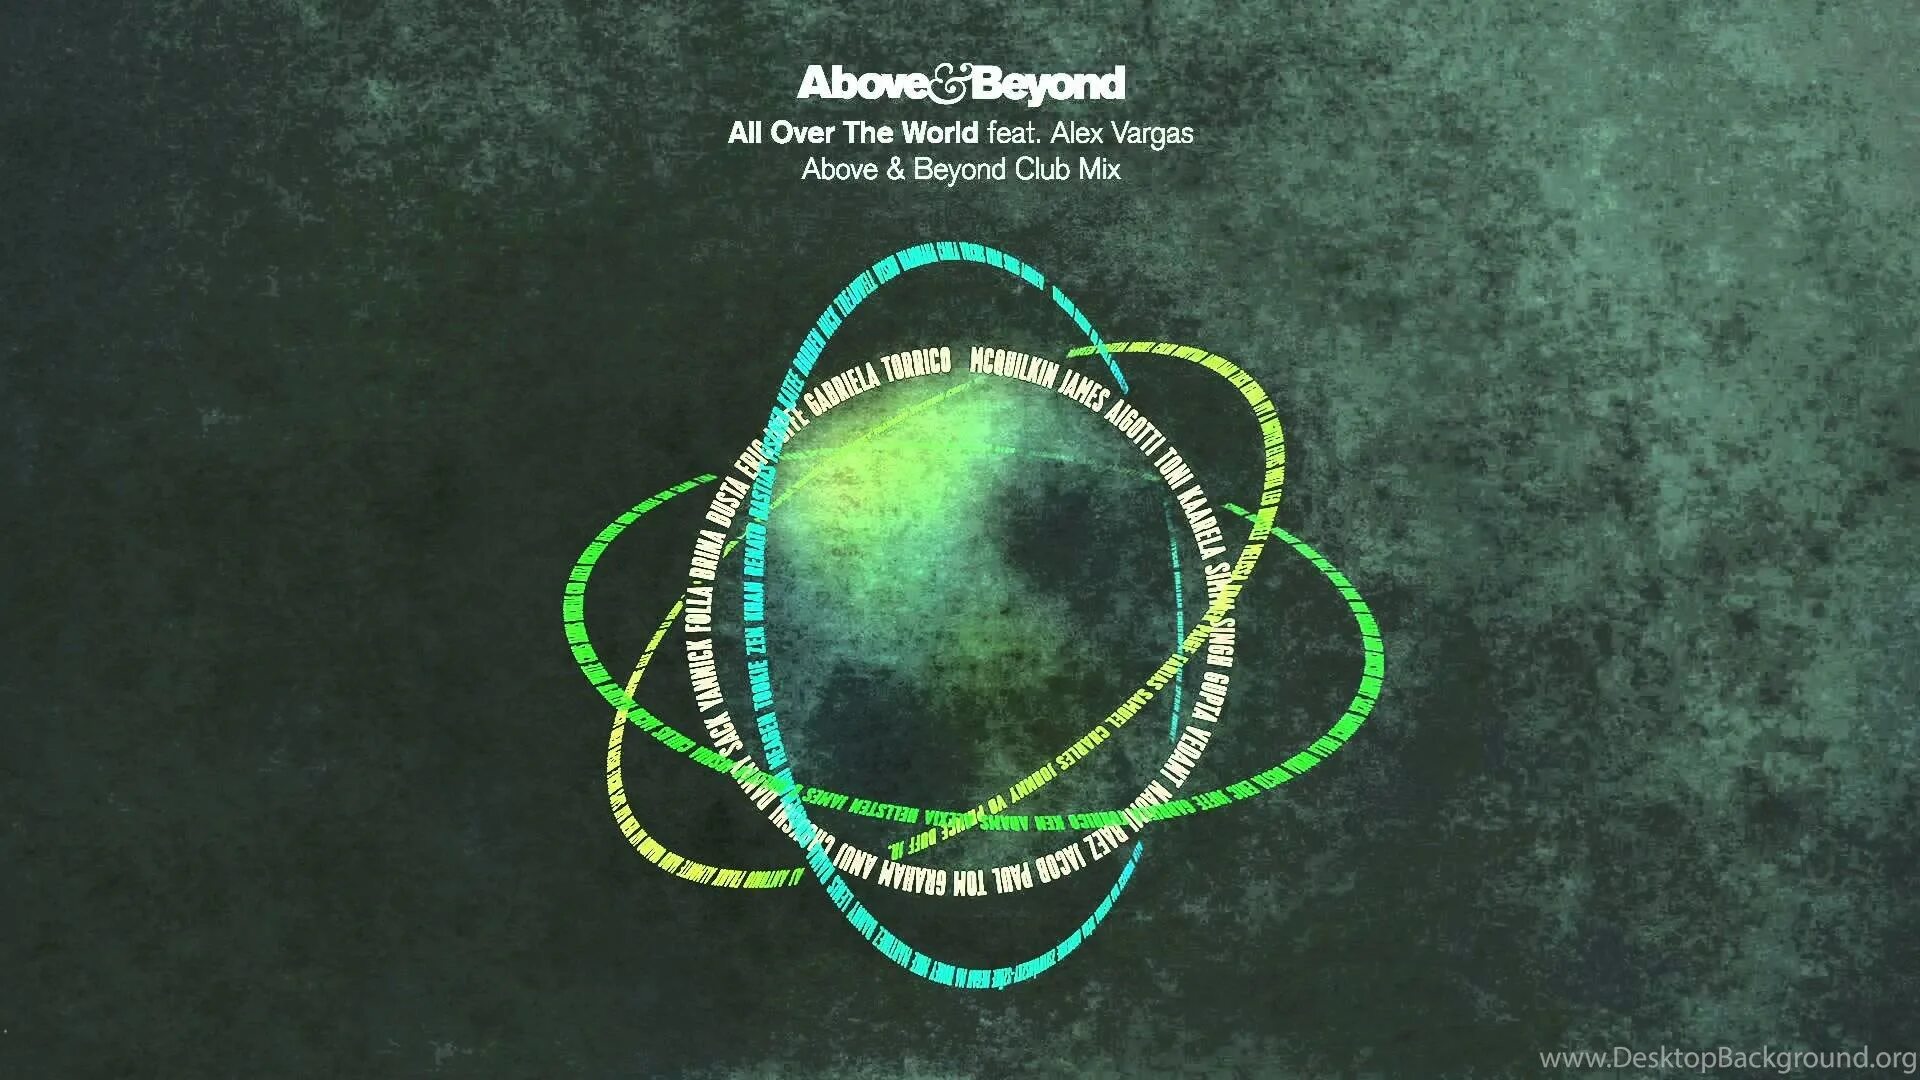 All over the world we. Above and Beyond. Группа above & Beyond. Above and Beyond обои. Beyond over above.